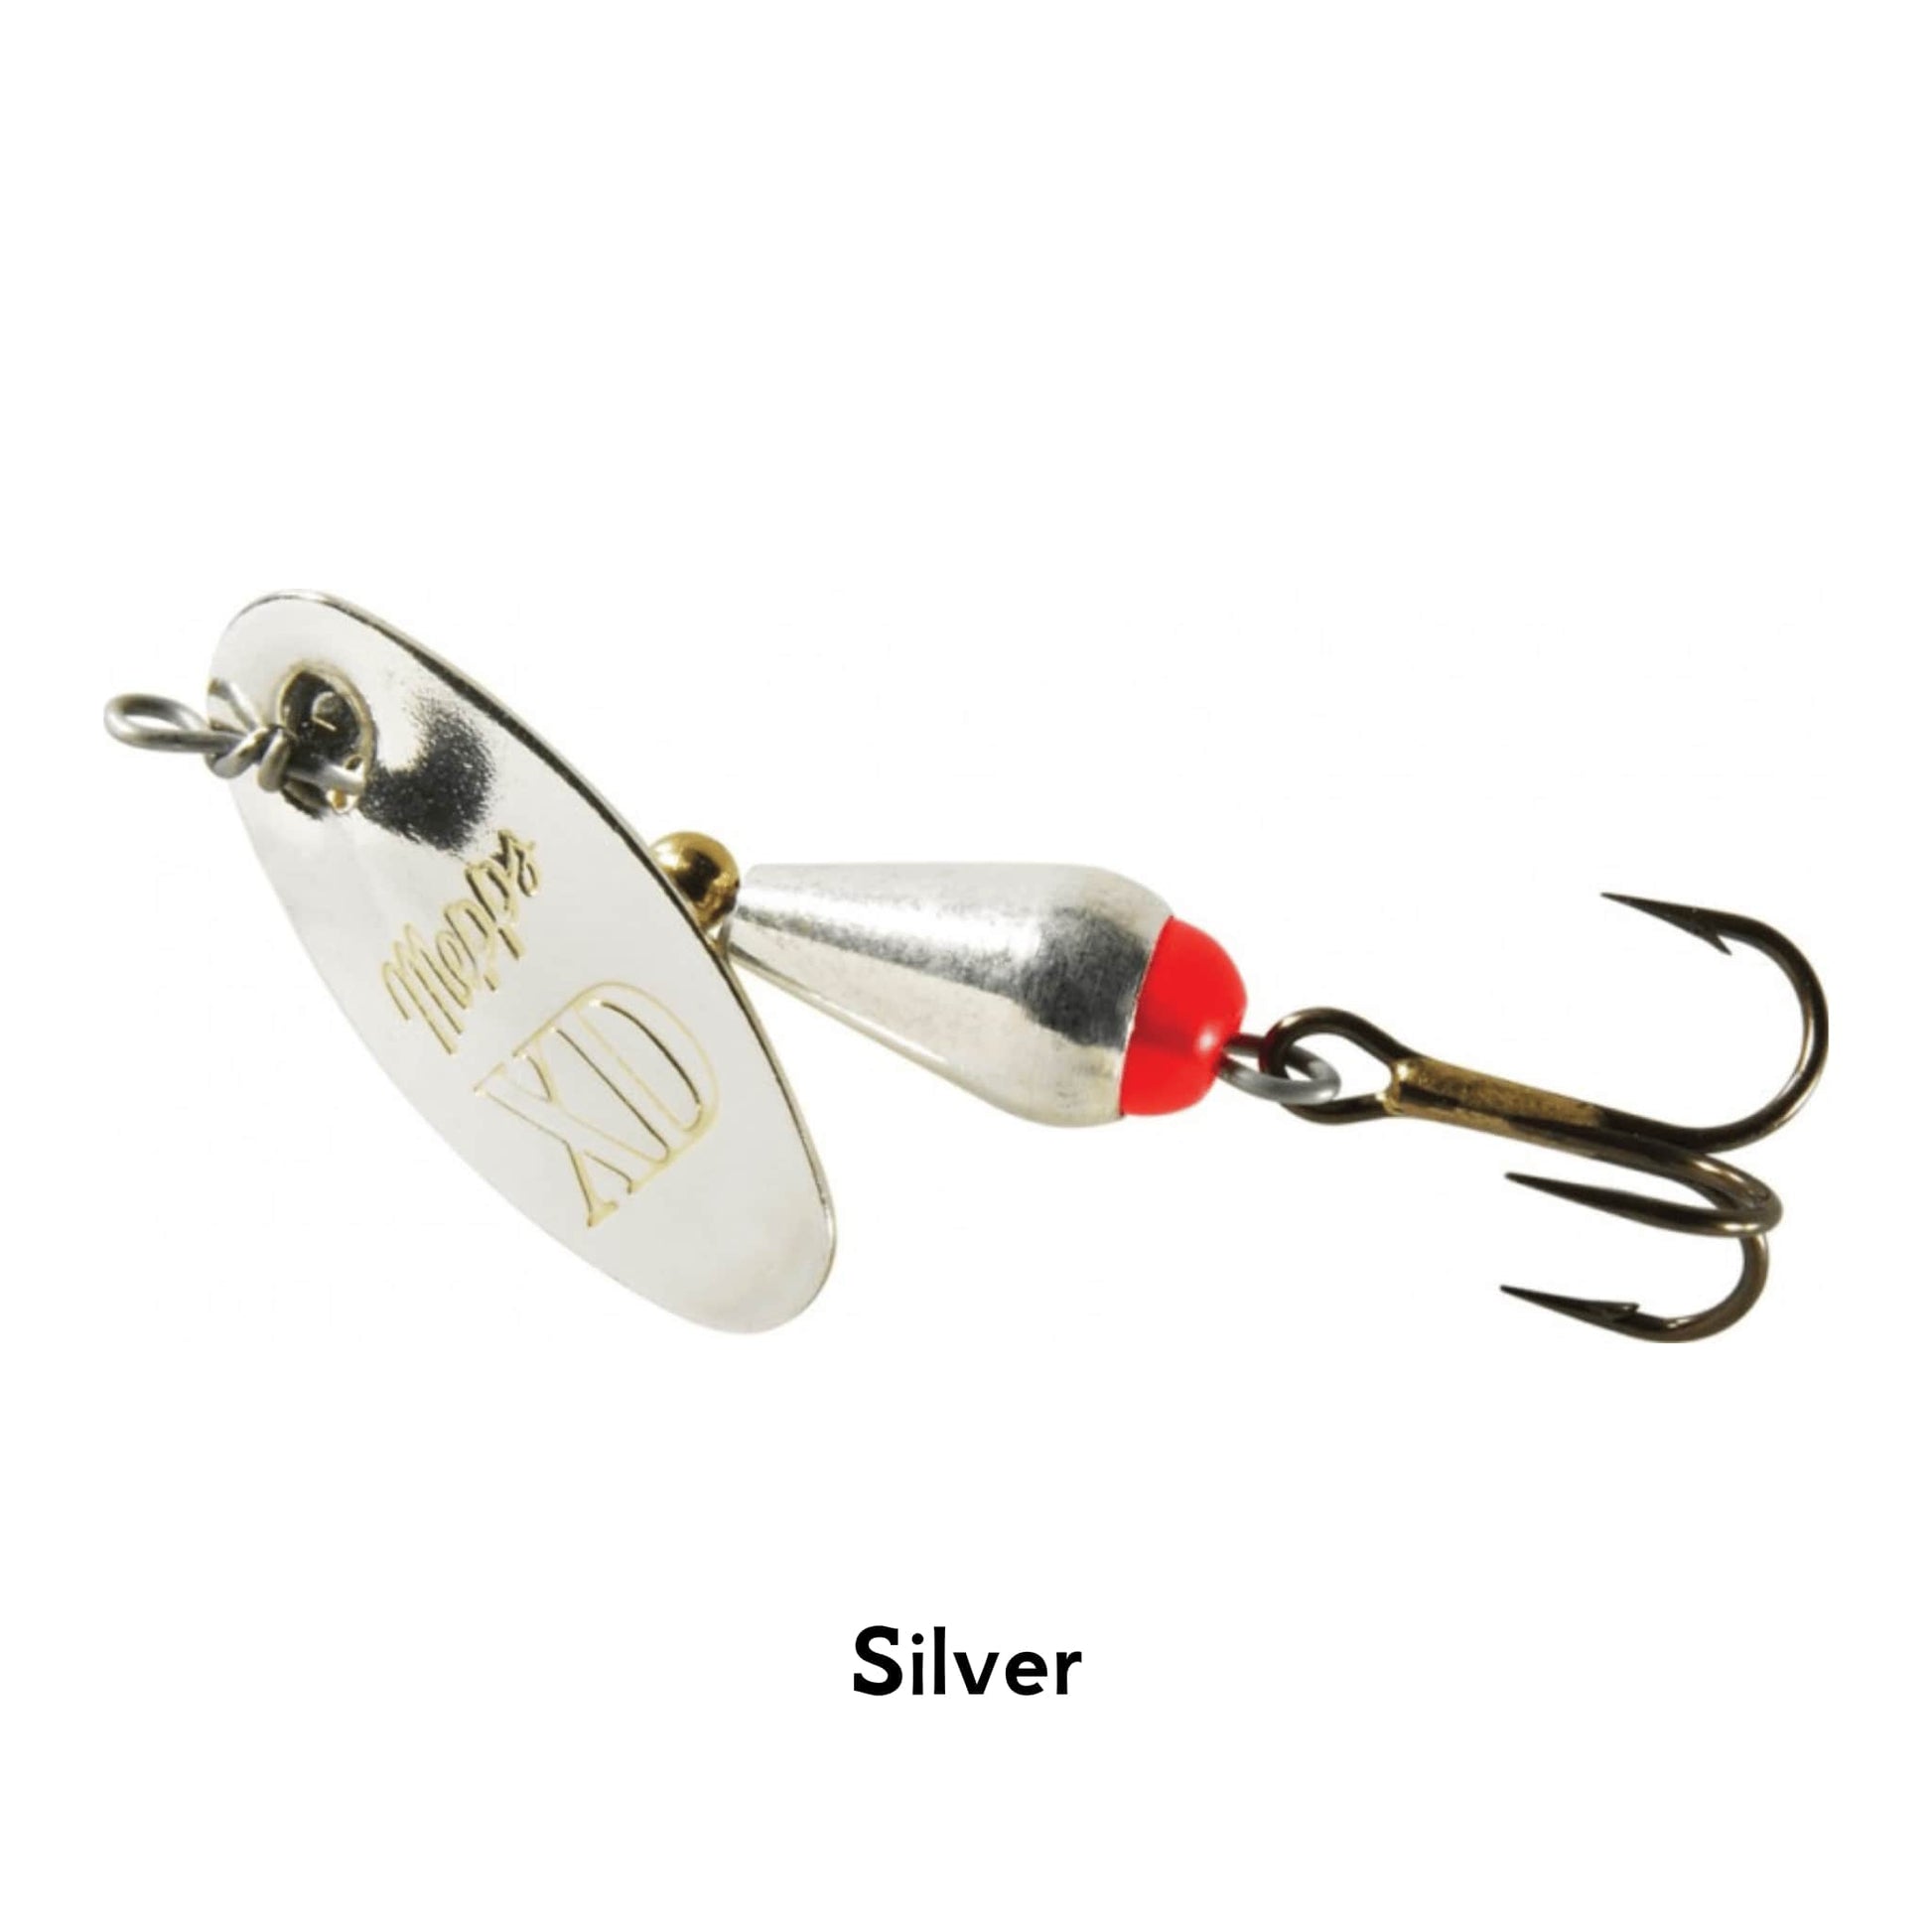 Mepps XD Xtra Deep Silver Spoon Fishing Lure All Colours Size 2 3 Pike Perch Zander Spinner Vertical Jig